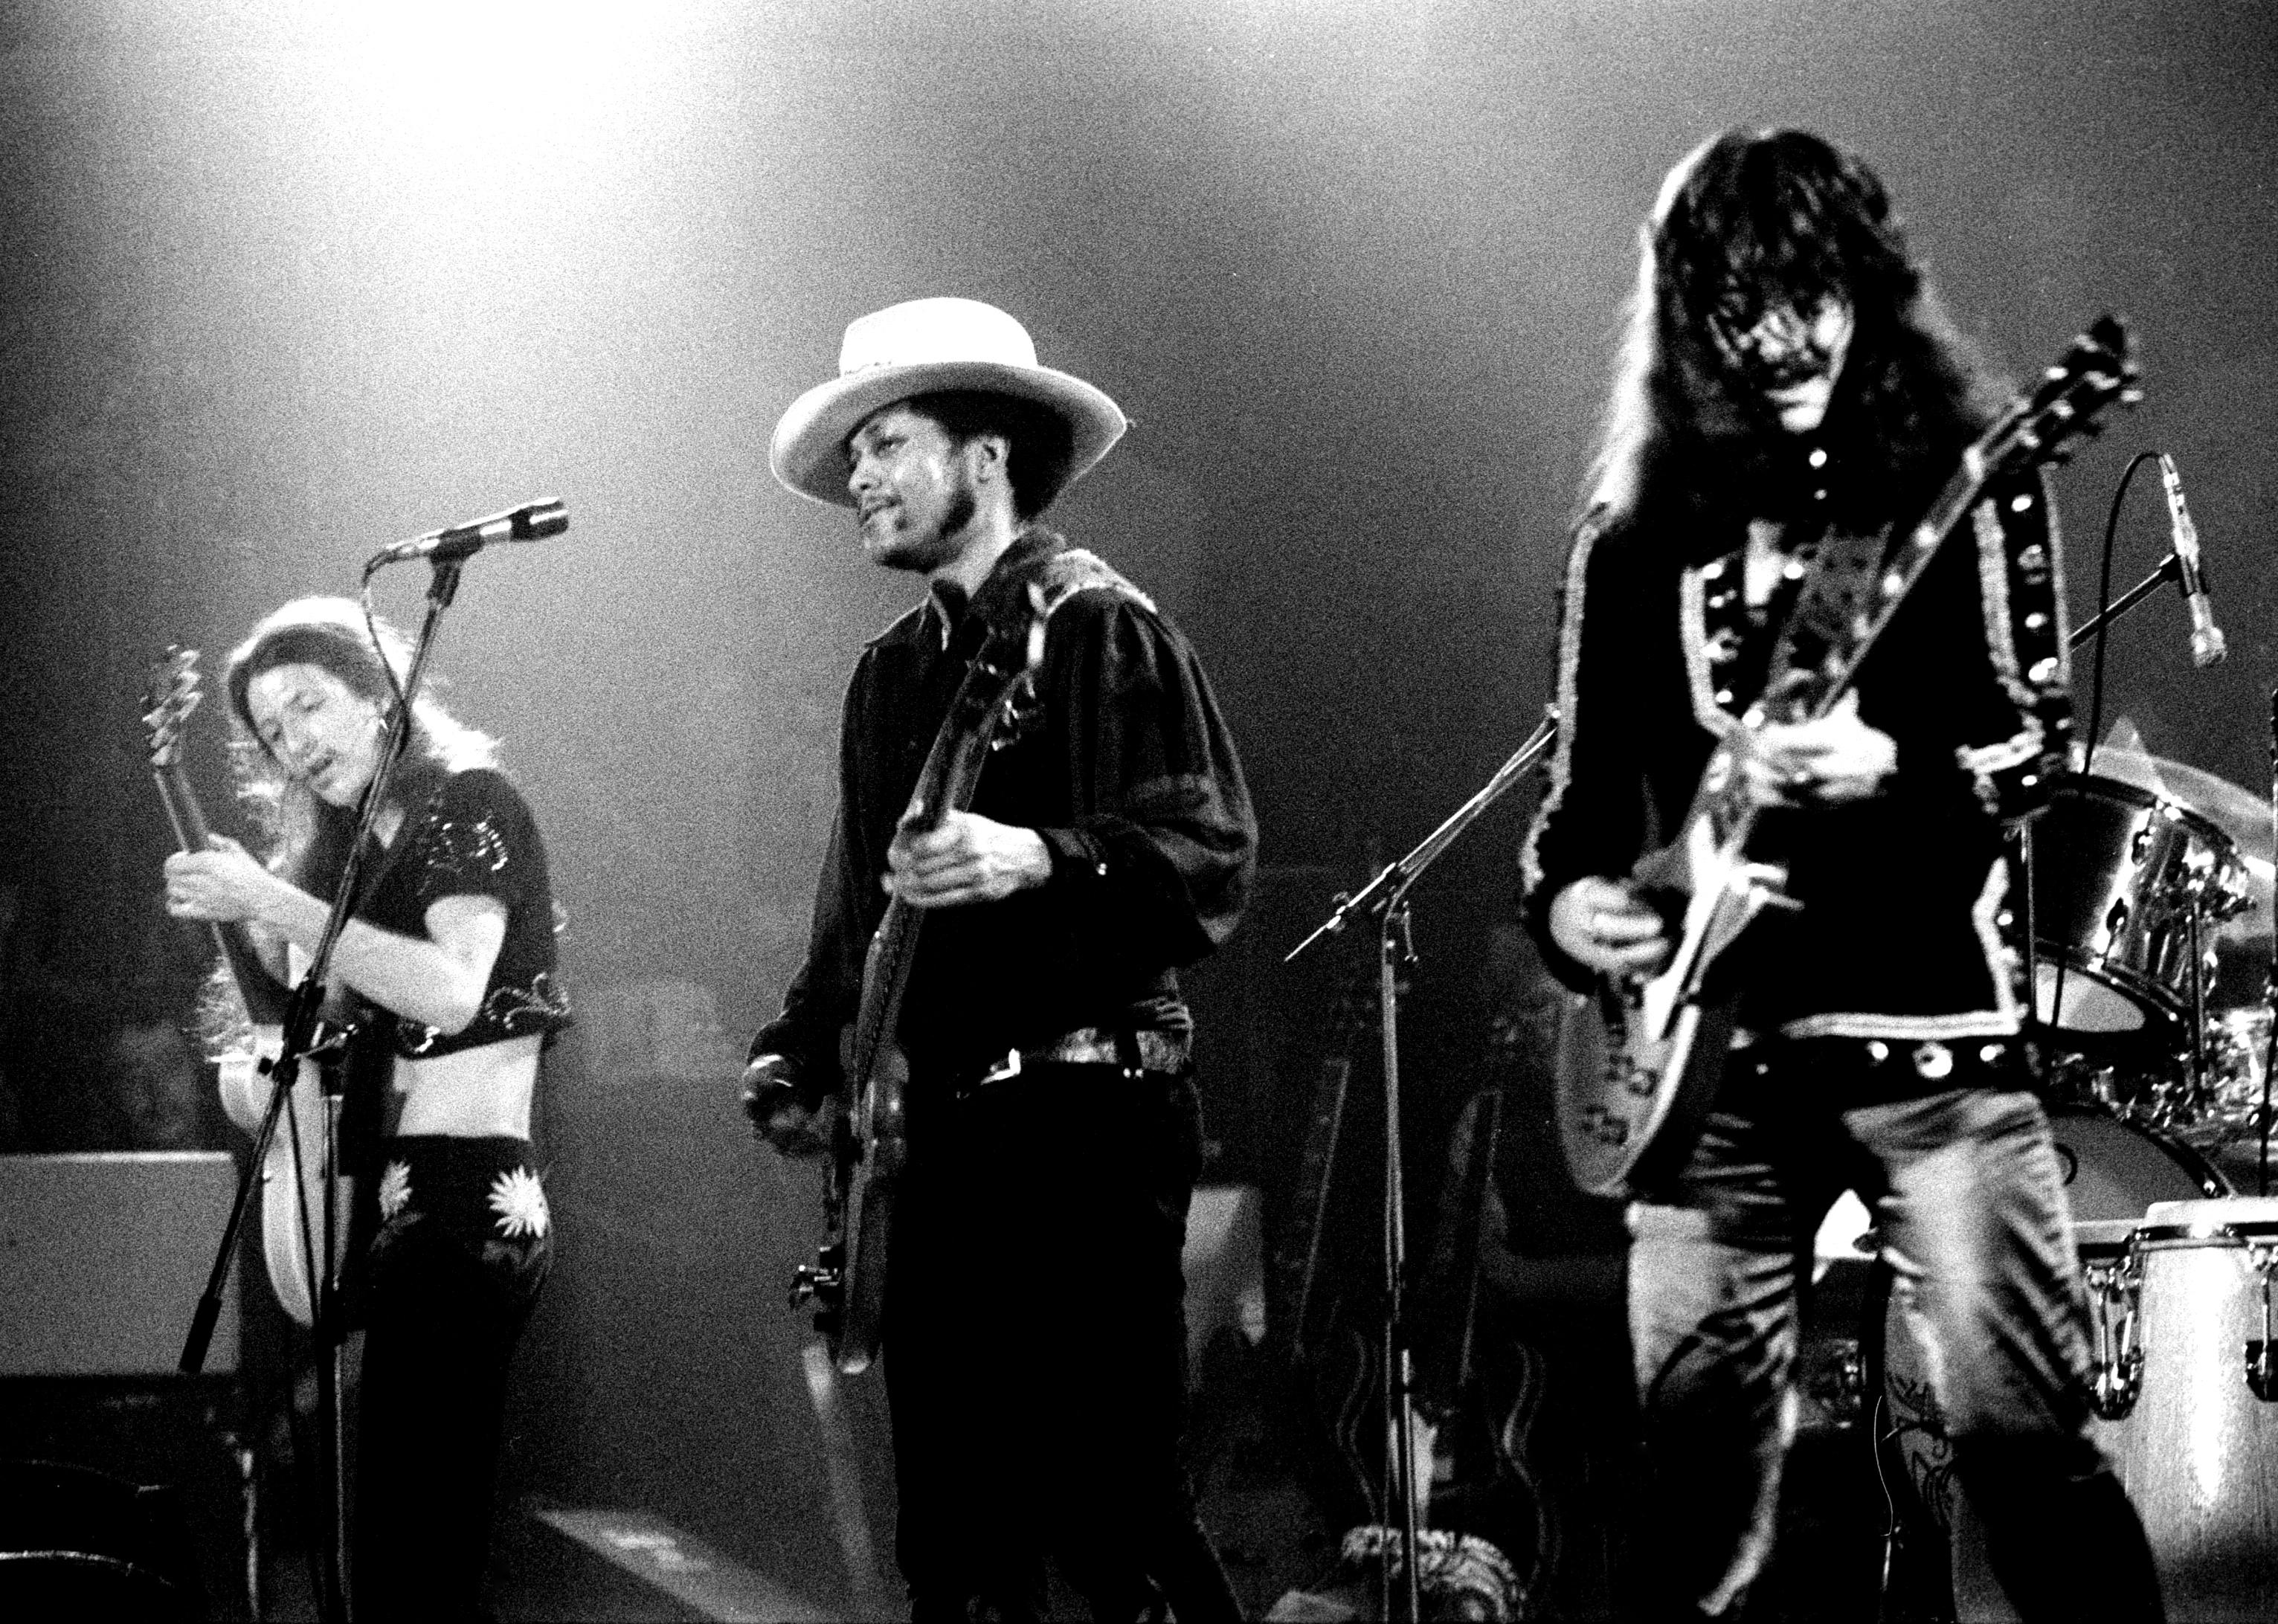 The Doobie Brothers perform live on stage.